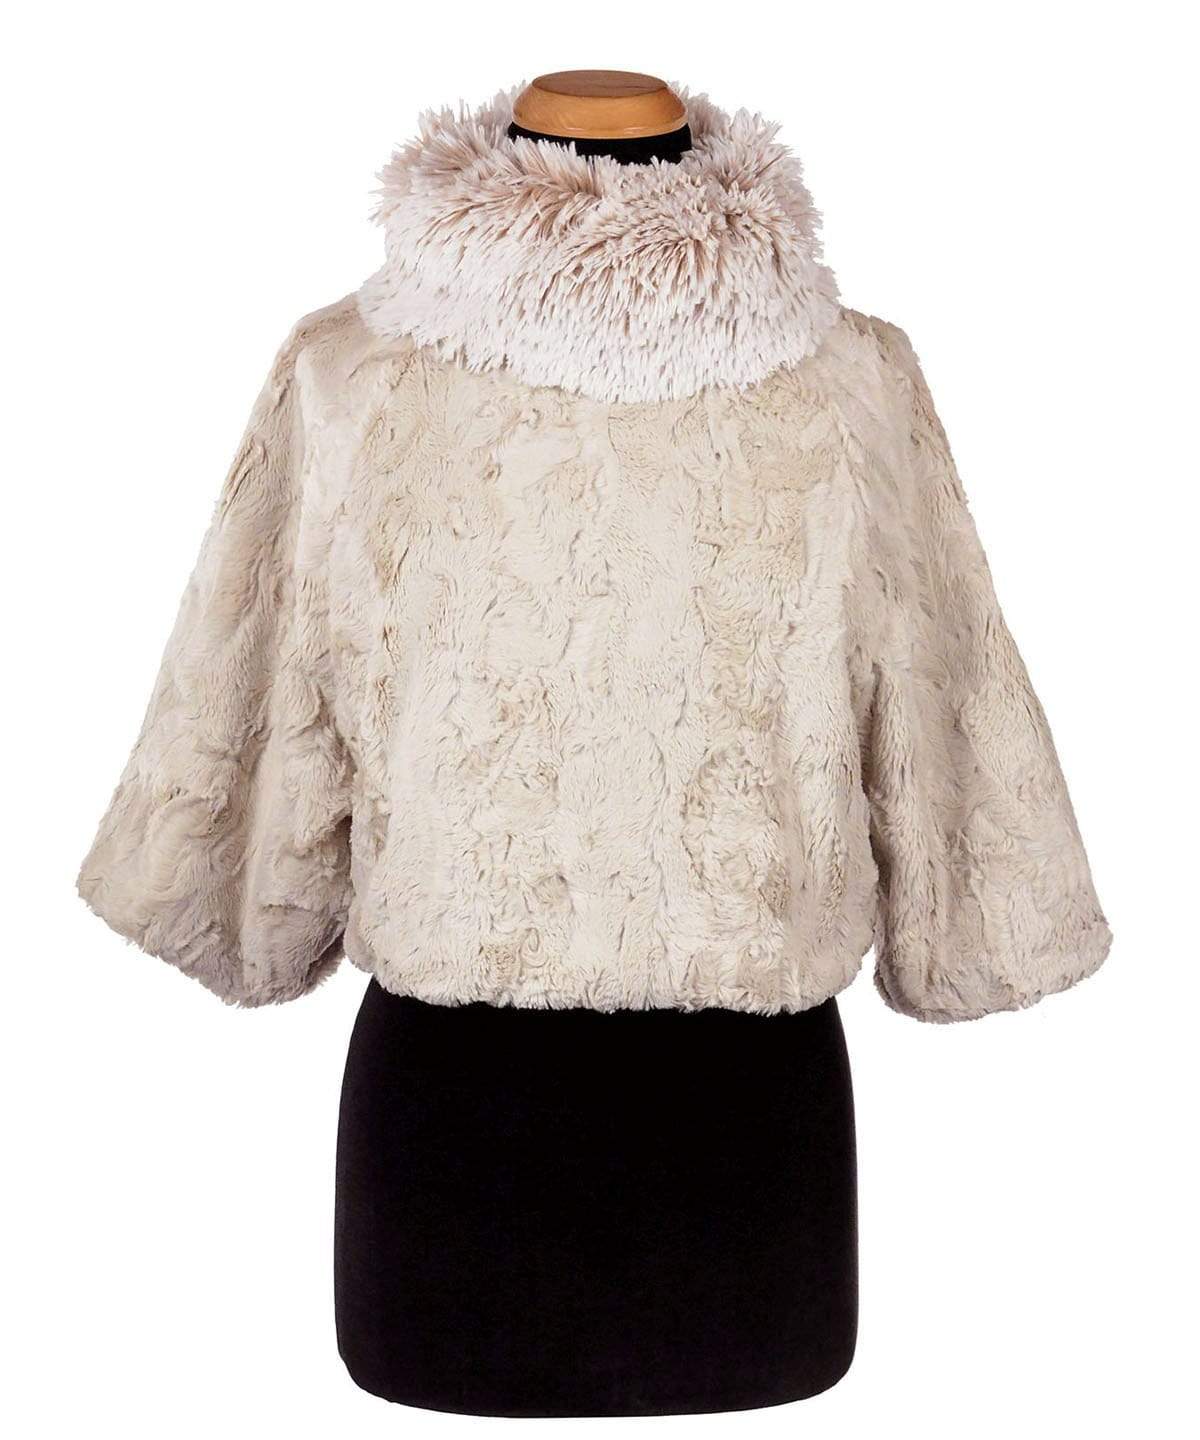 Sweater Top | Cuddly Sand Faux Fur with Foxy Beach Collar | Handmade By Pandemonium Millinery | Seattle WA USA